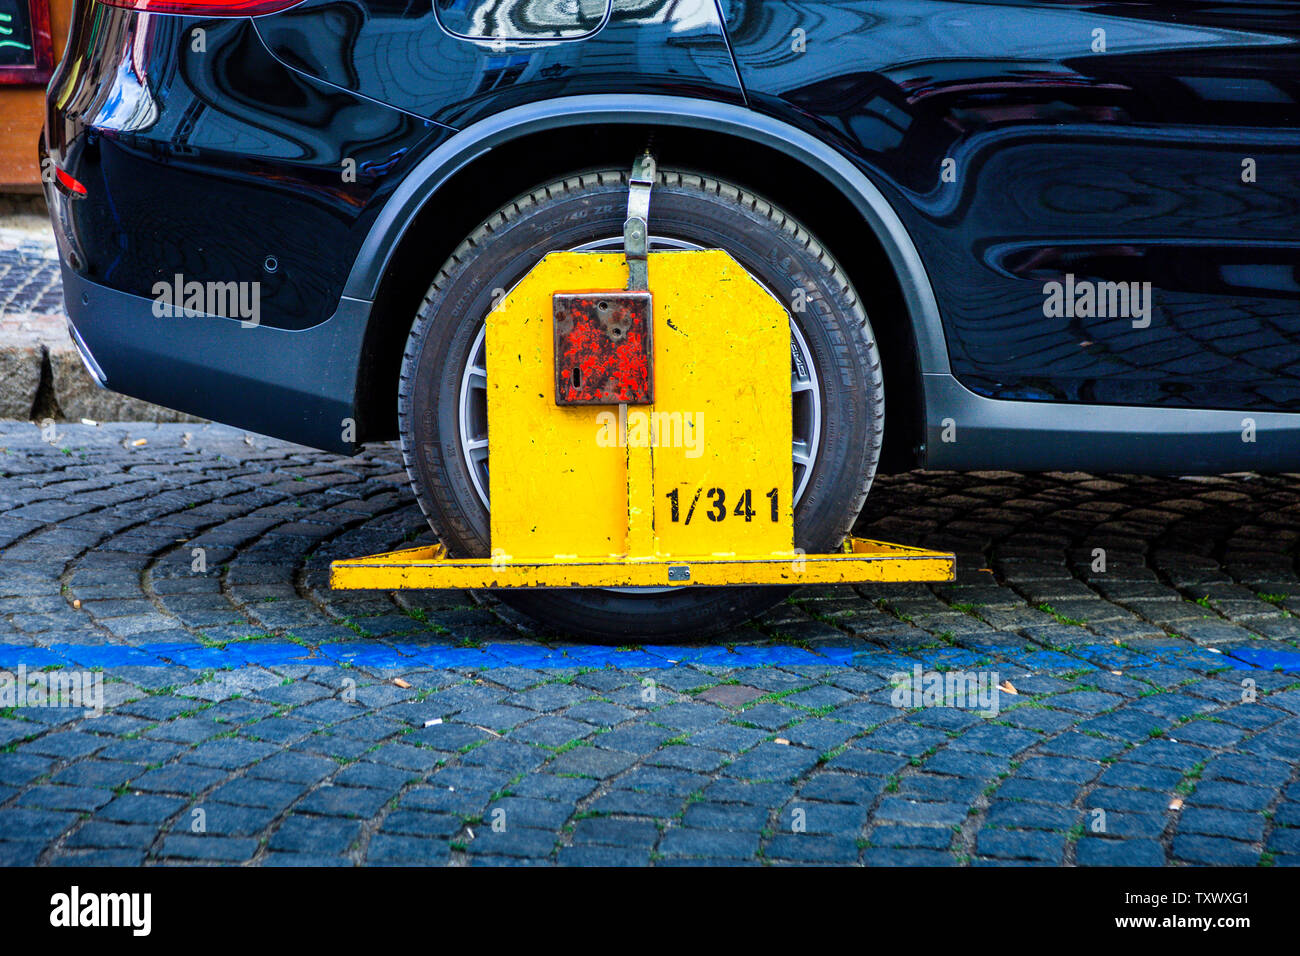 Wheel Clamp on parked car in Praha, Czech Republic Stock Photo